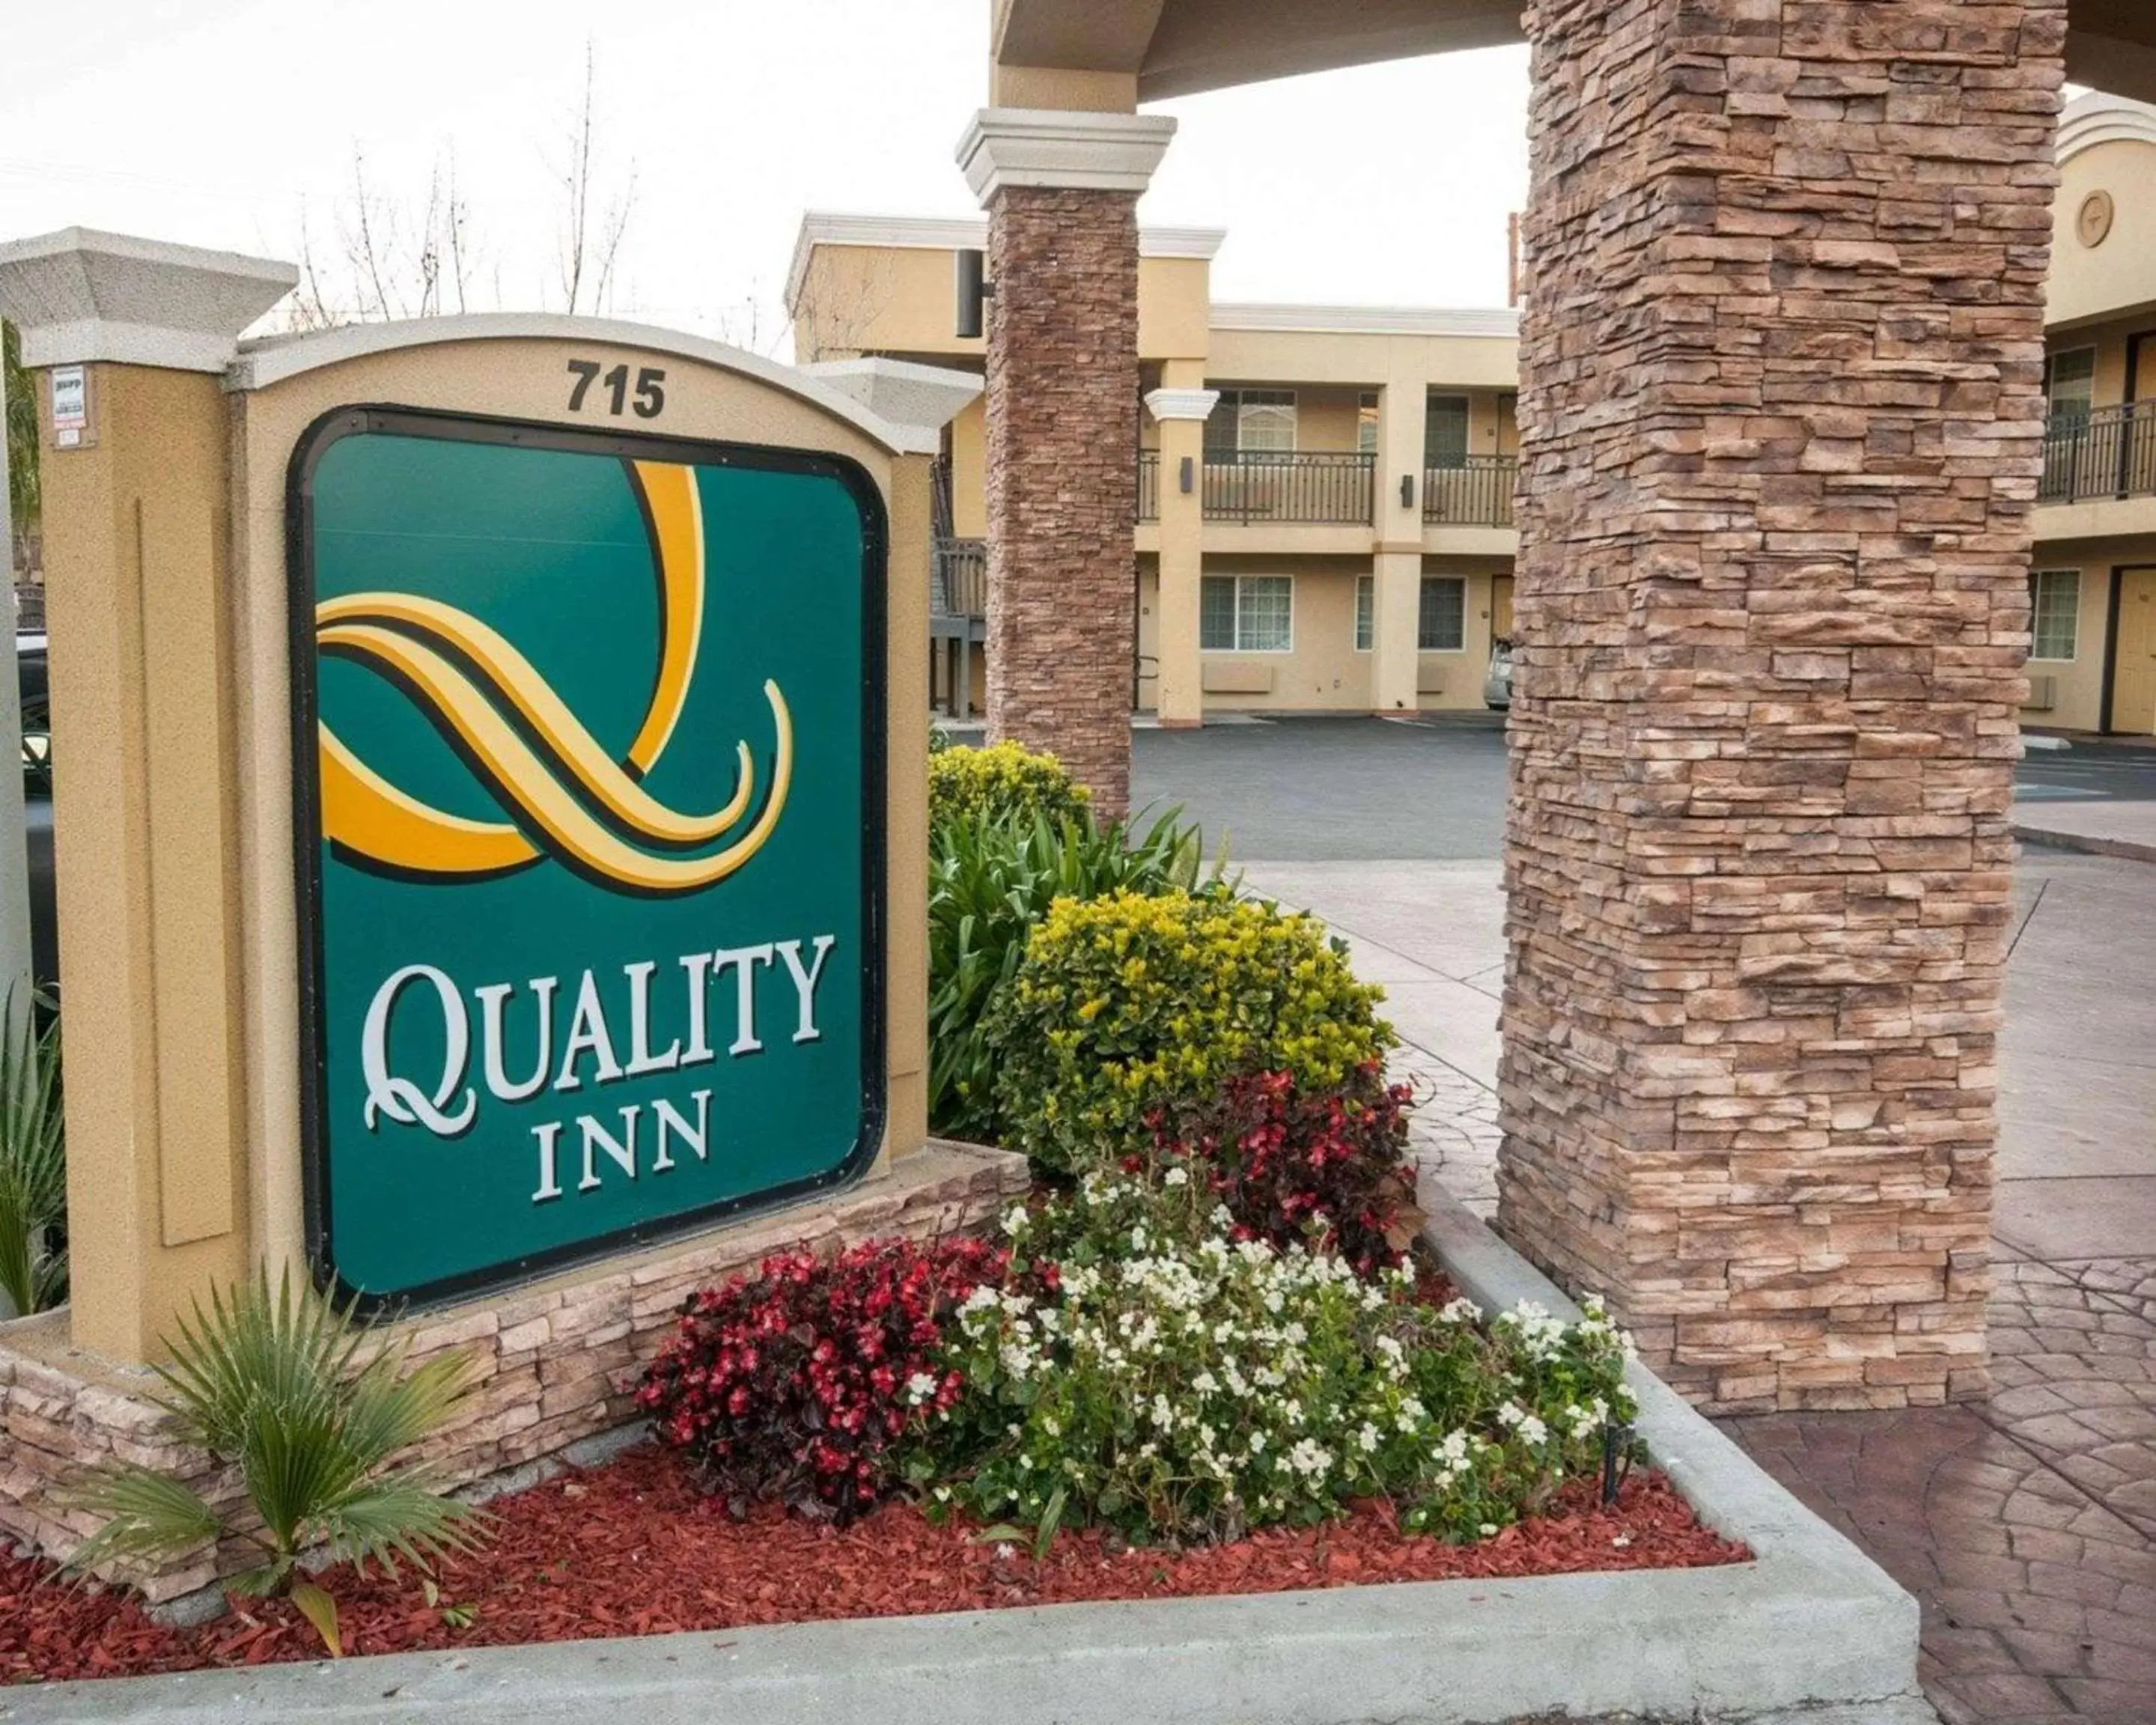 Property building in Quality Inn Chico